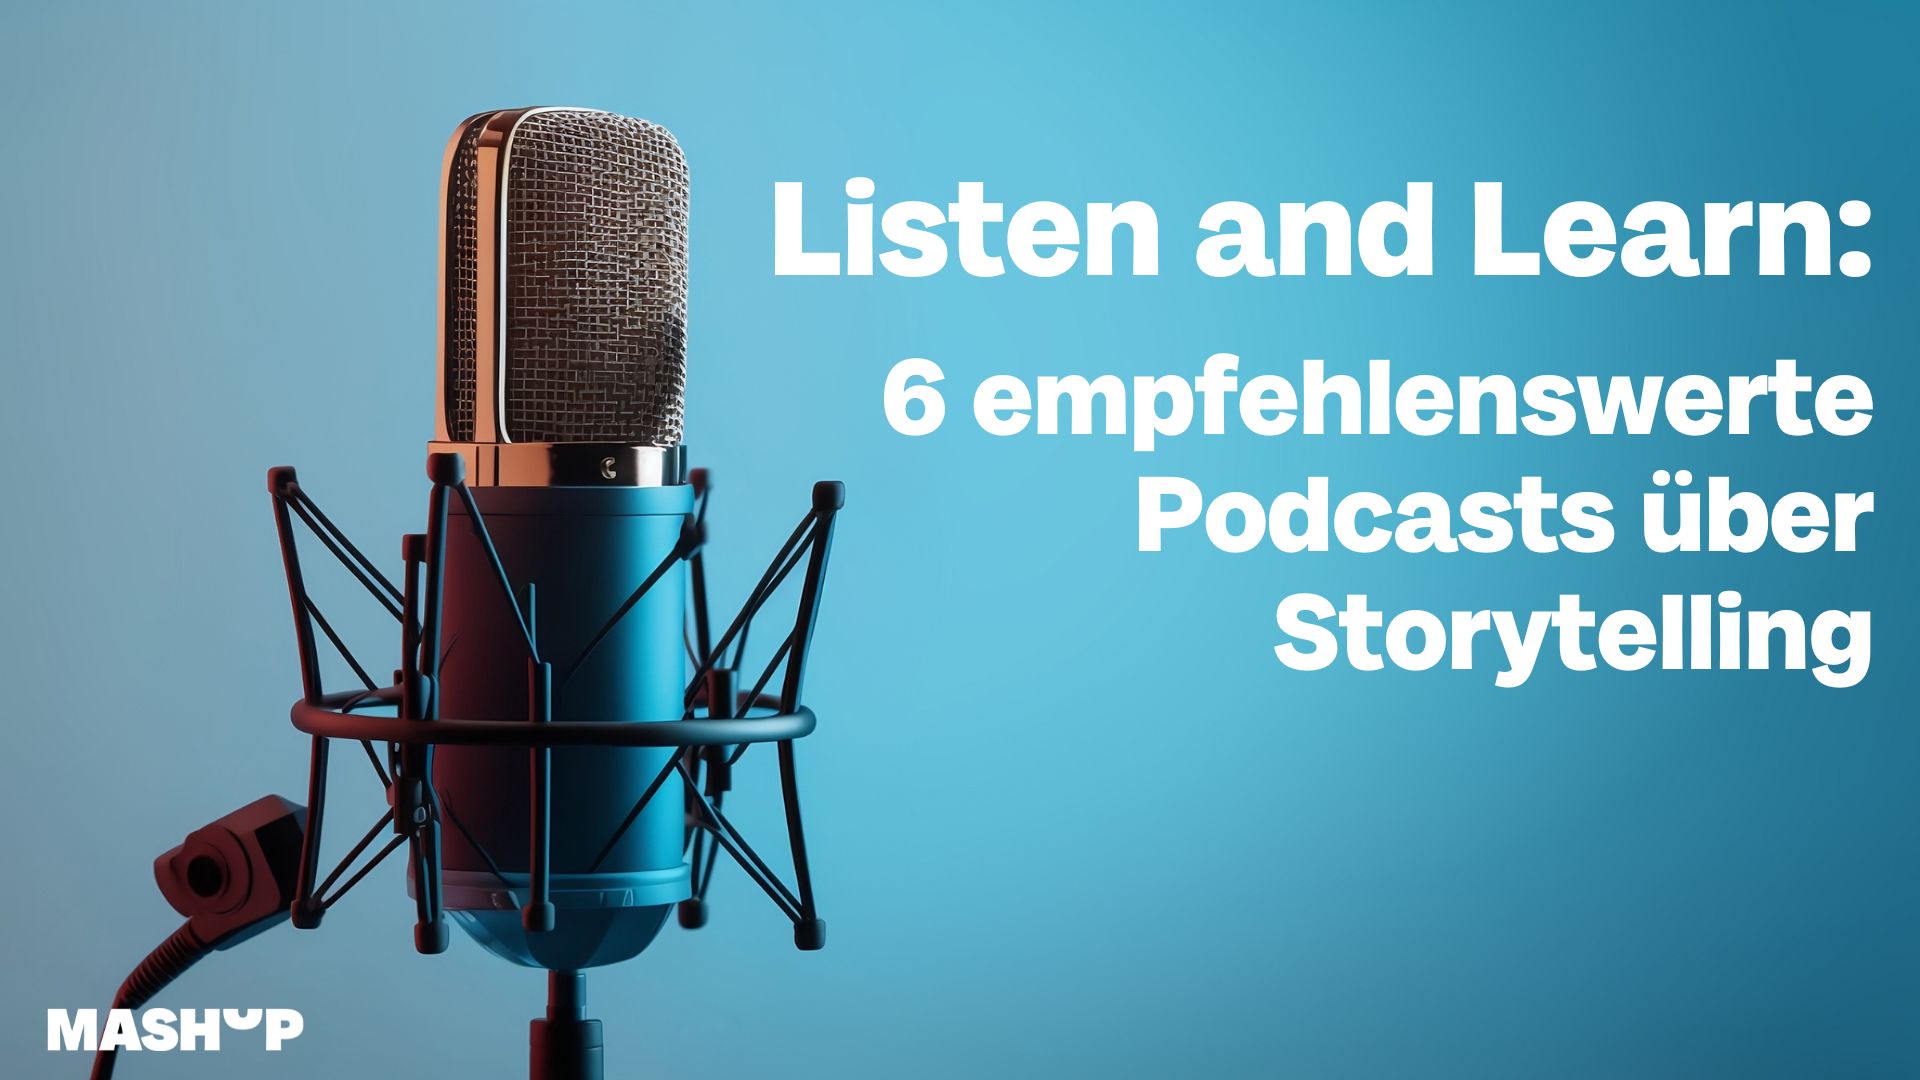 Listen and Learn: 6 recommended Podcasts about Storytelling